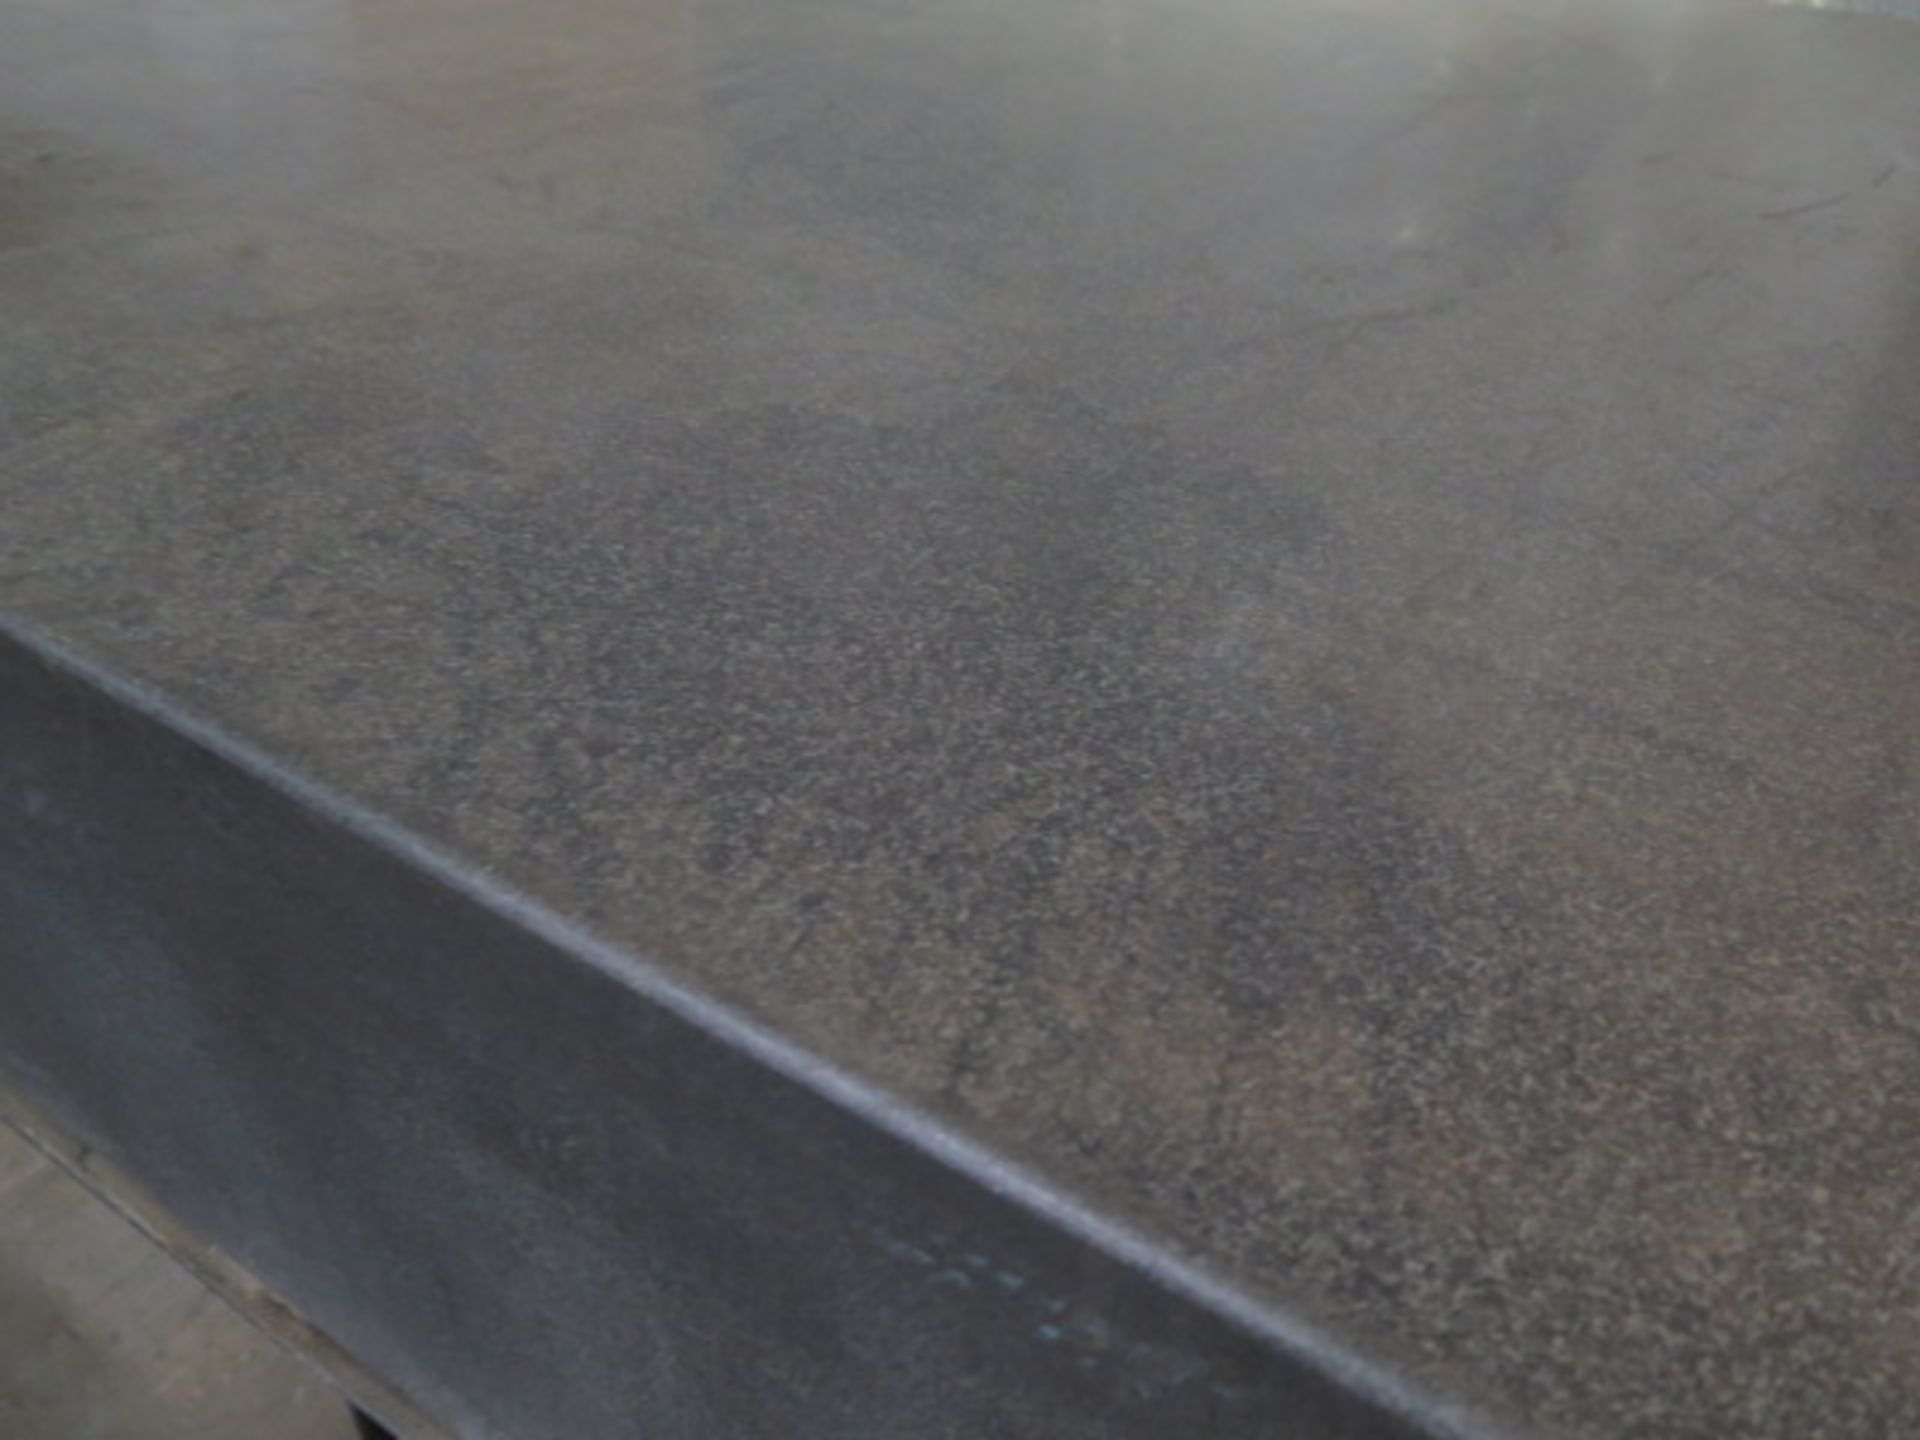 48” x 120” x 12” Granite Surface Plate w/ Stand (SOLD AS-IS - NO WARRANTY) - Image 4 of 5